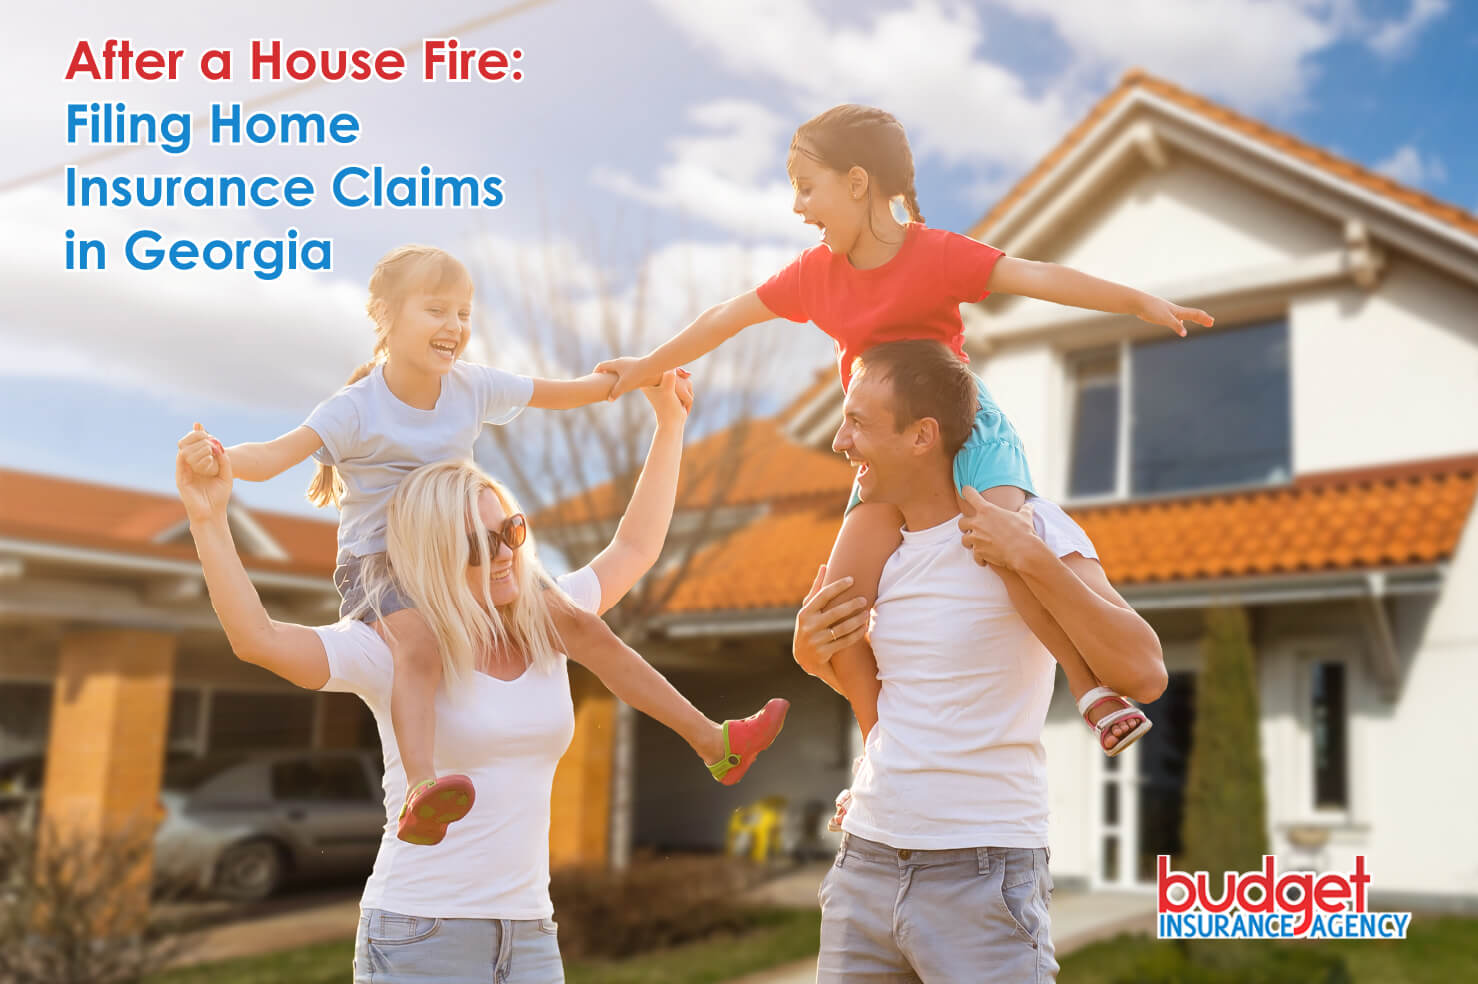 After a House Fire: Filing Home Insurance Claims in Georgia